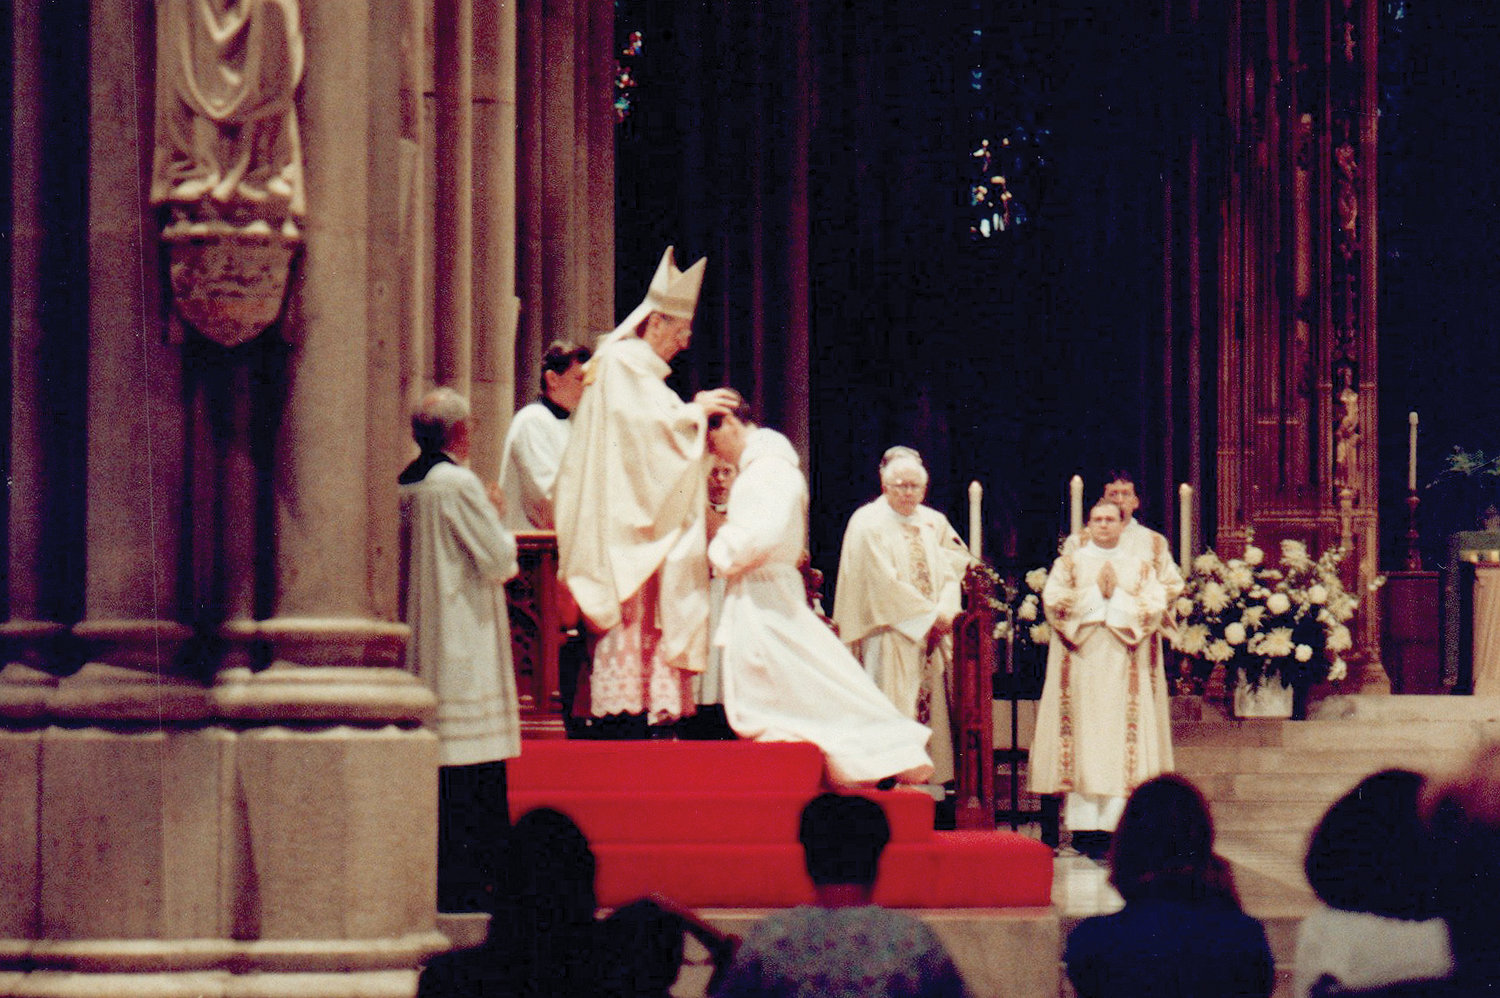 Father John Bonnici is ordained a priest by Cardinal John O’Connor June 22, 1991, at St. Patrick’s Cathedral.